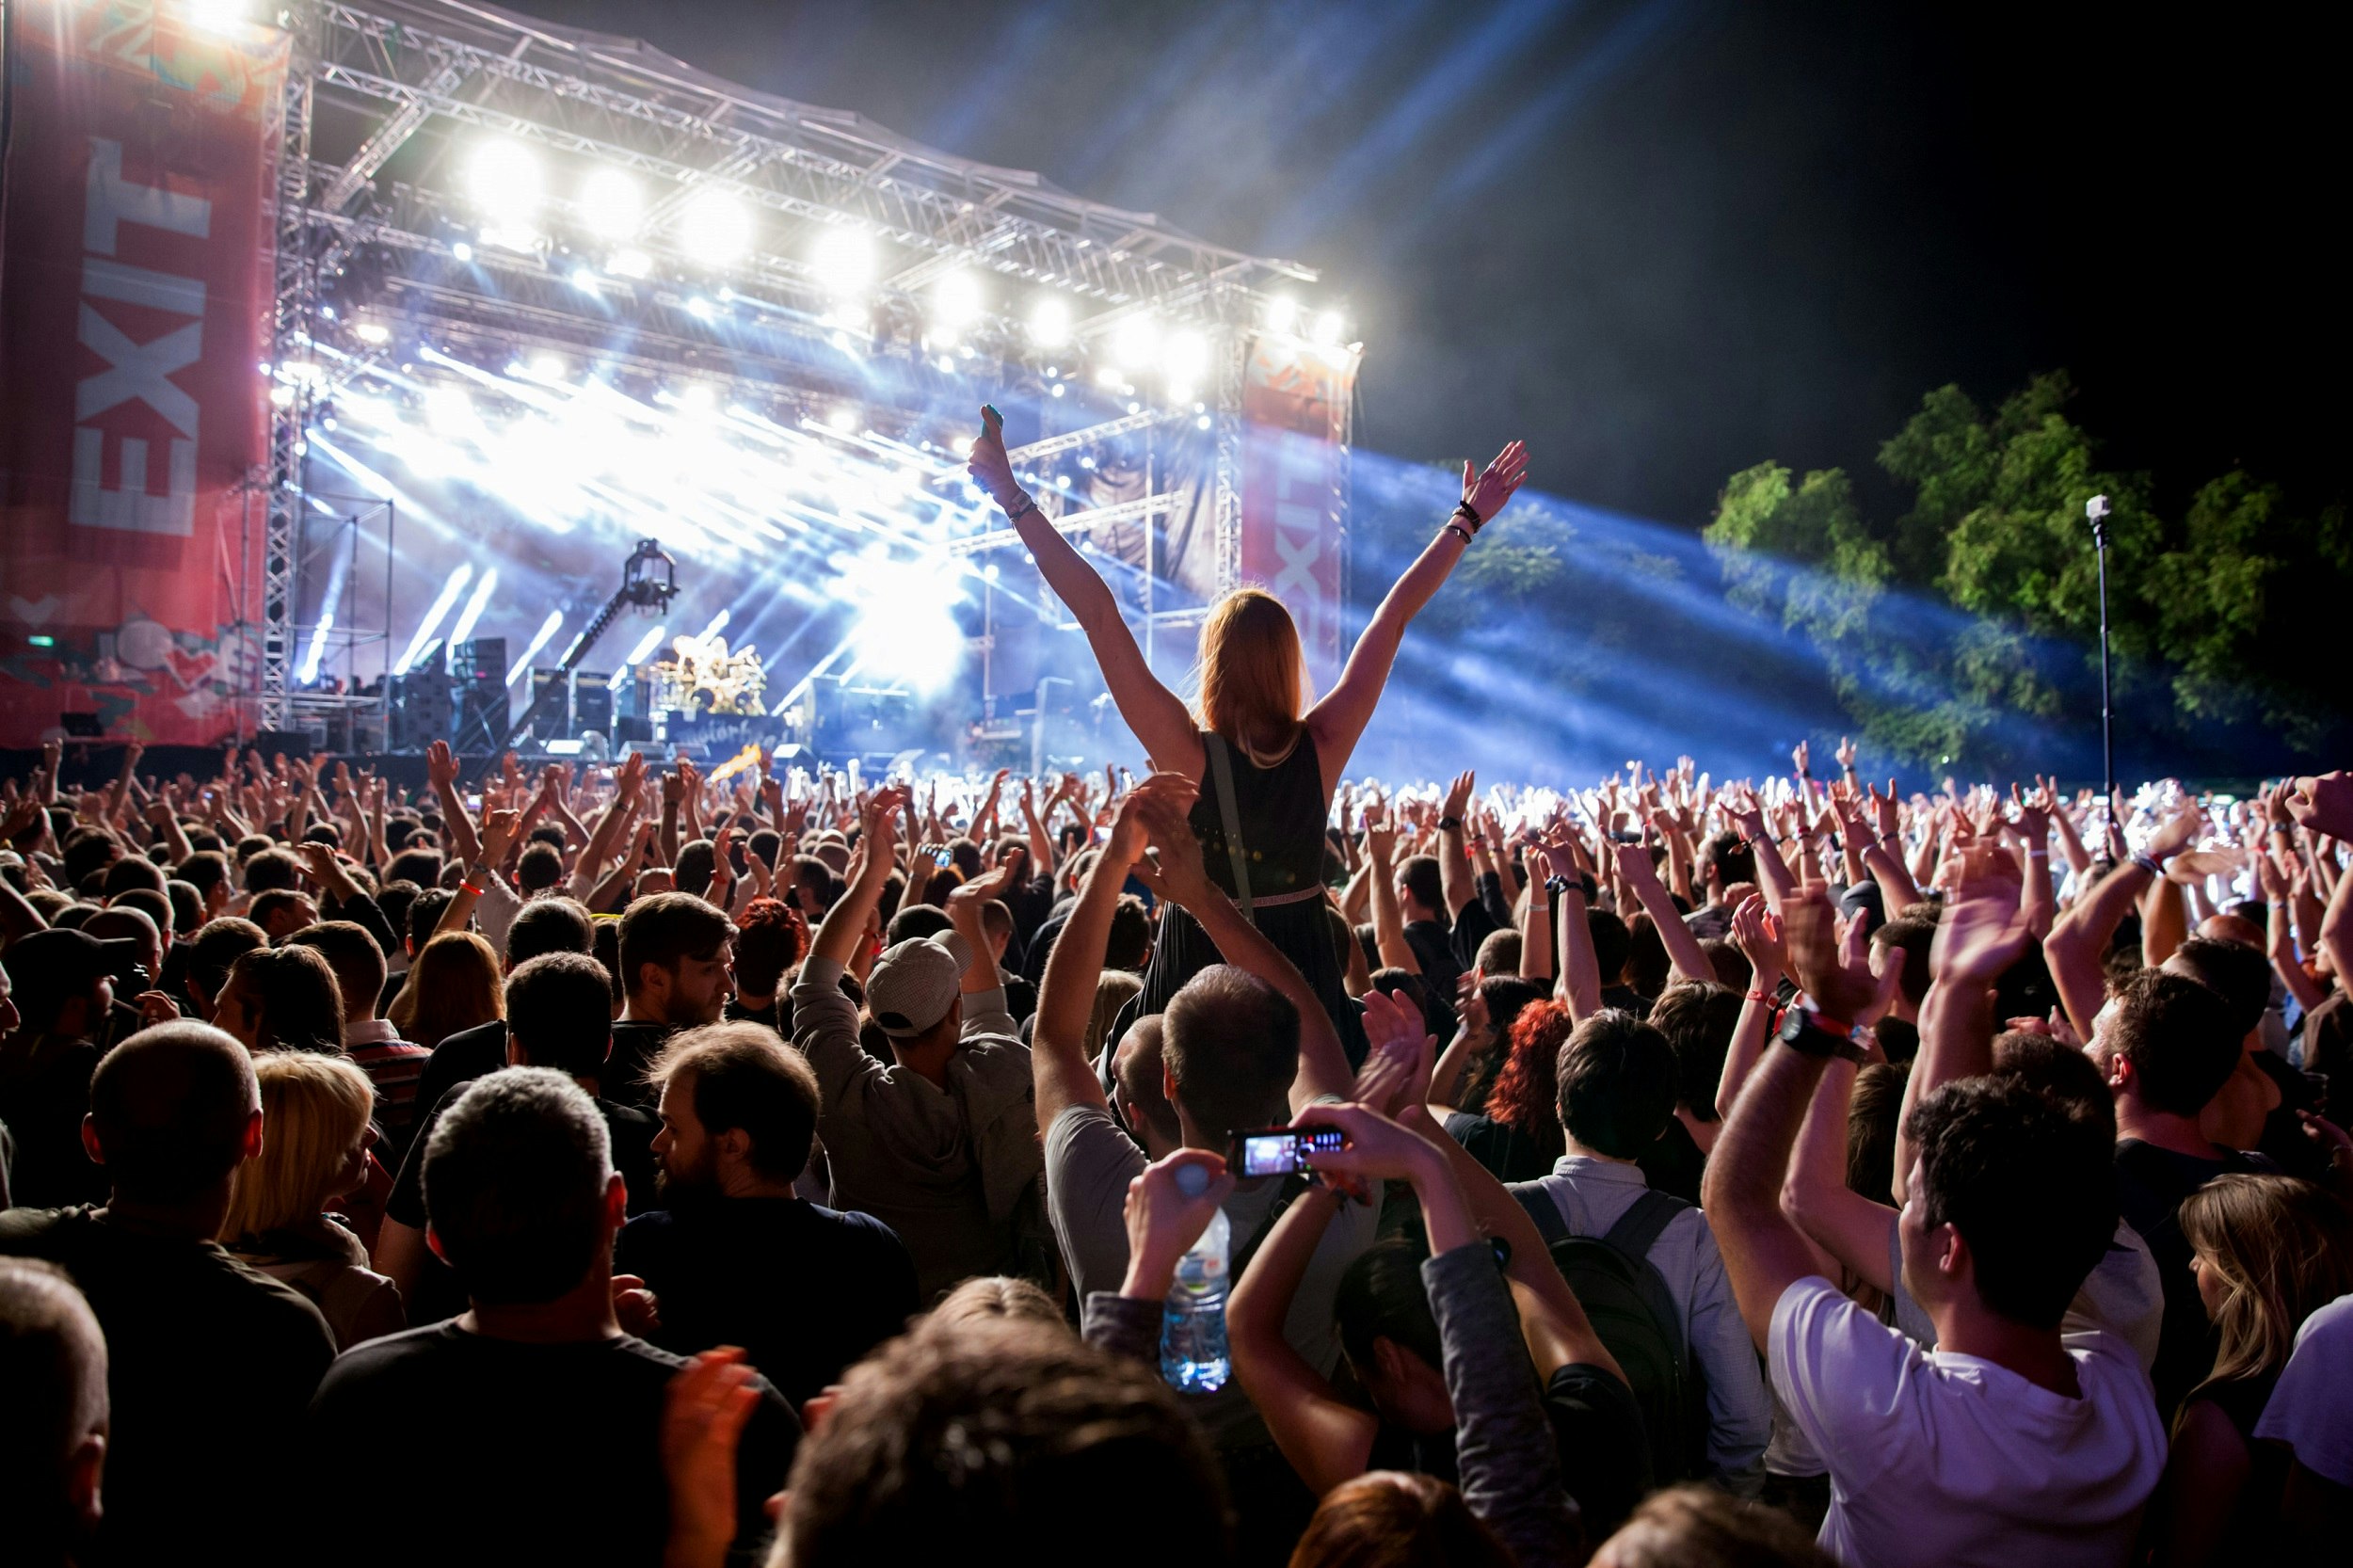 A shot towards a well-lit stage. Many of the crowd, seen from behind, have their hands in the air. A woman in the centre of the crowd sits on someone's shoulders